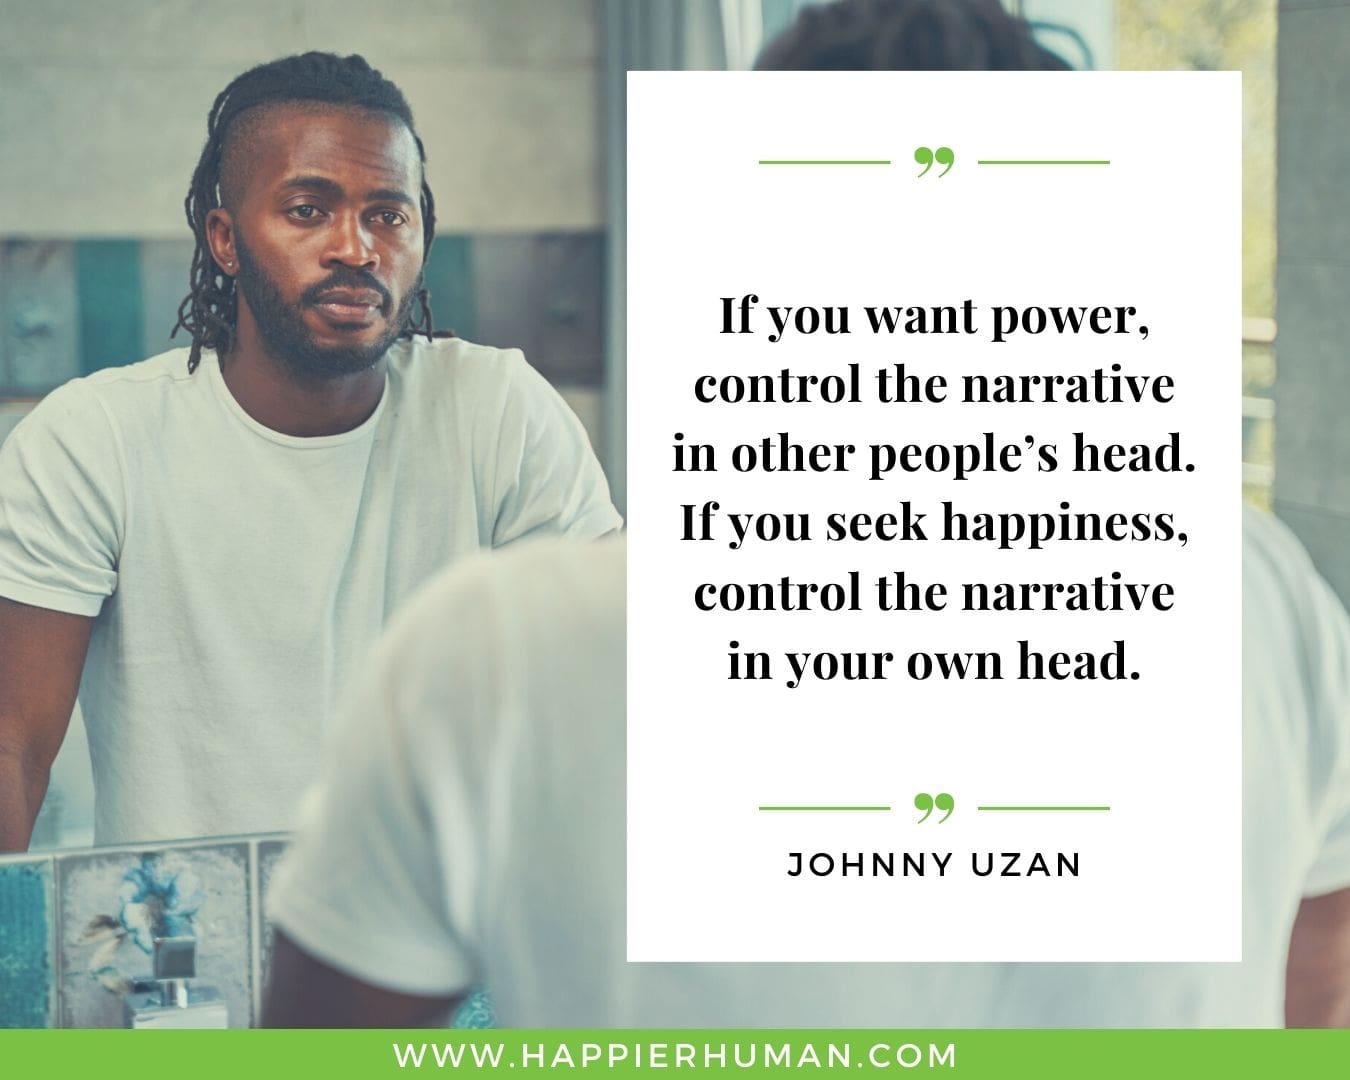 Overthinking Quotes - "If you want power, control the narrative in other people’s head. If you seek happiness, control the narrative in your own head." - Johnny Uzan.